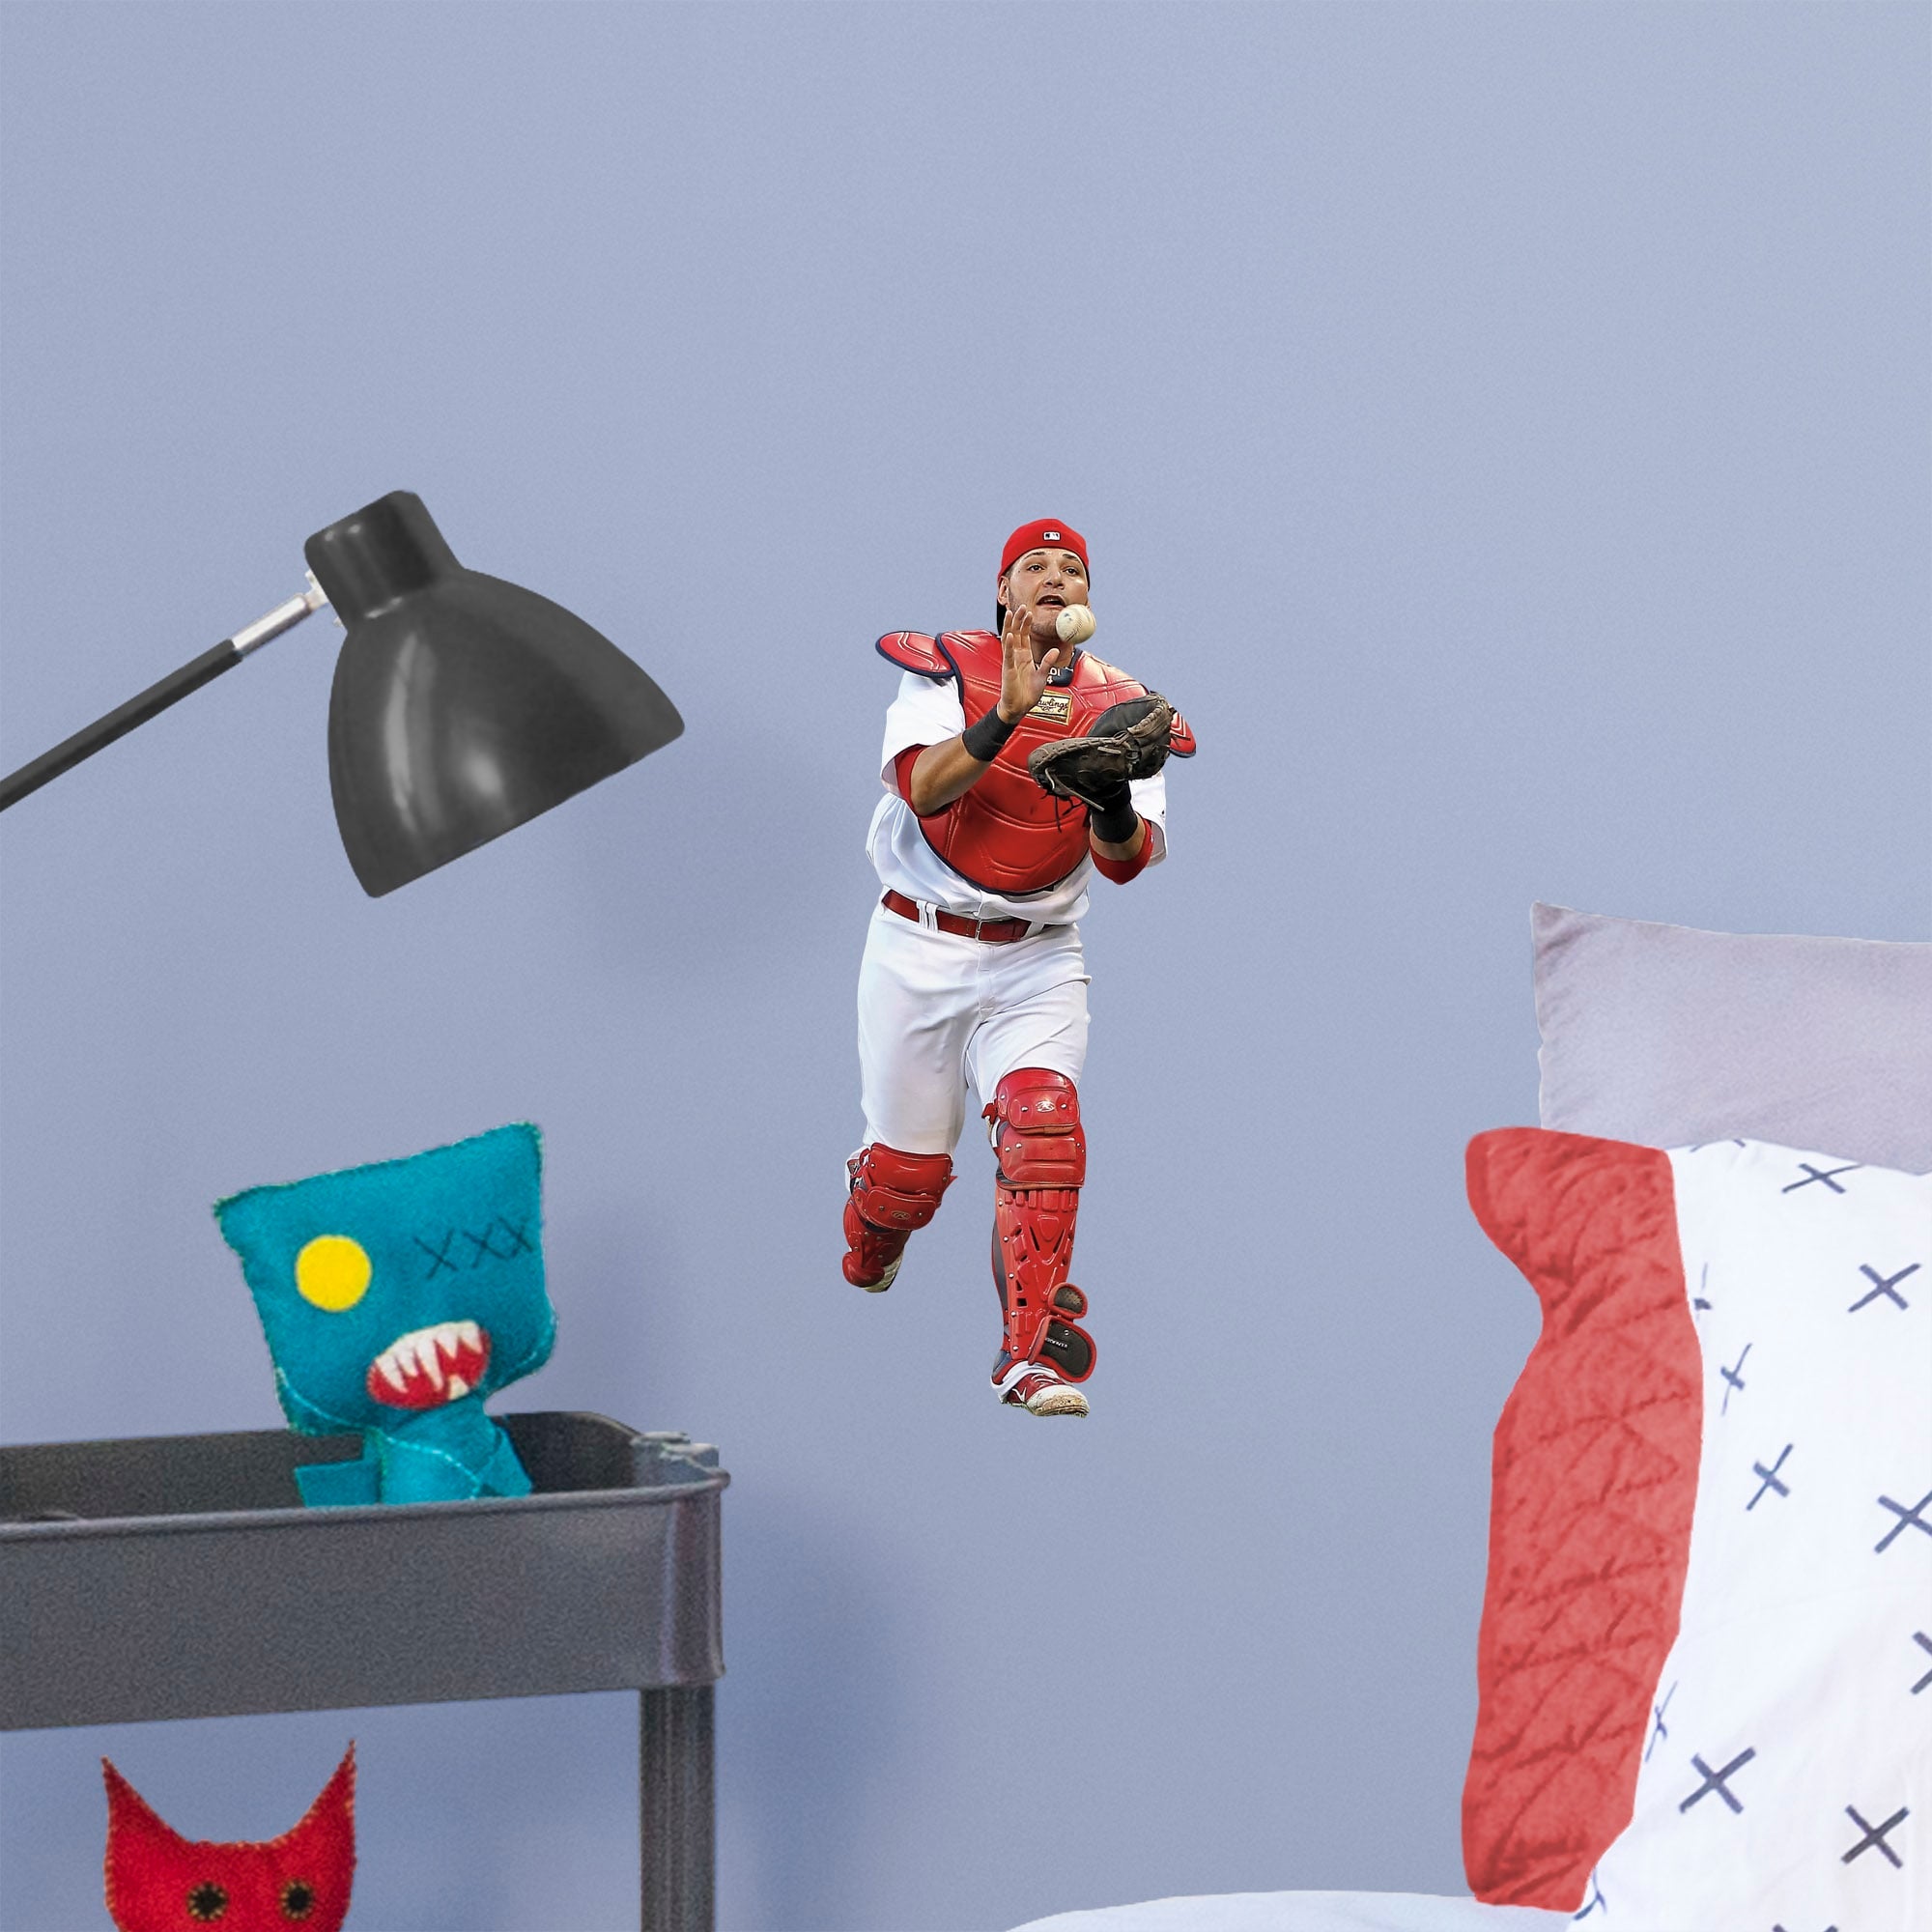 Yadier Molina for St. Louis Cardinals - Officially Licensed MLB Removable Wall Decal Large by Fathead | Vinyl